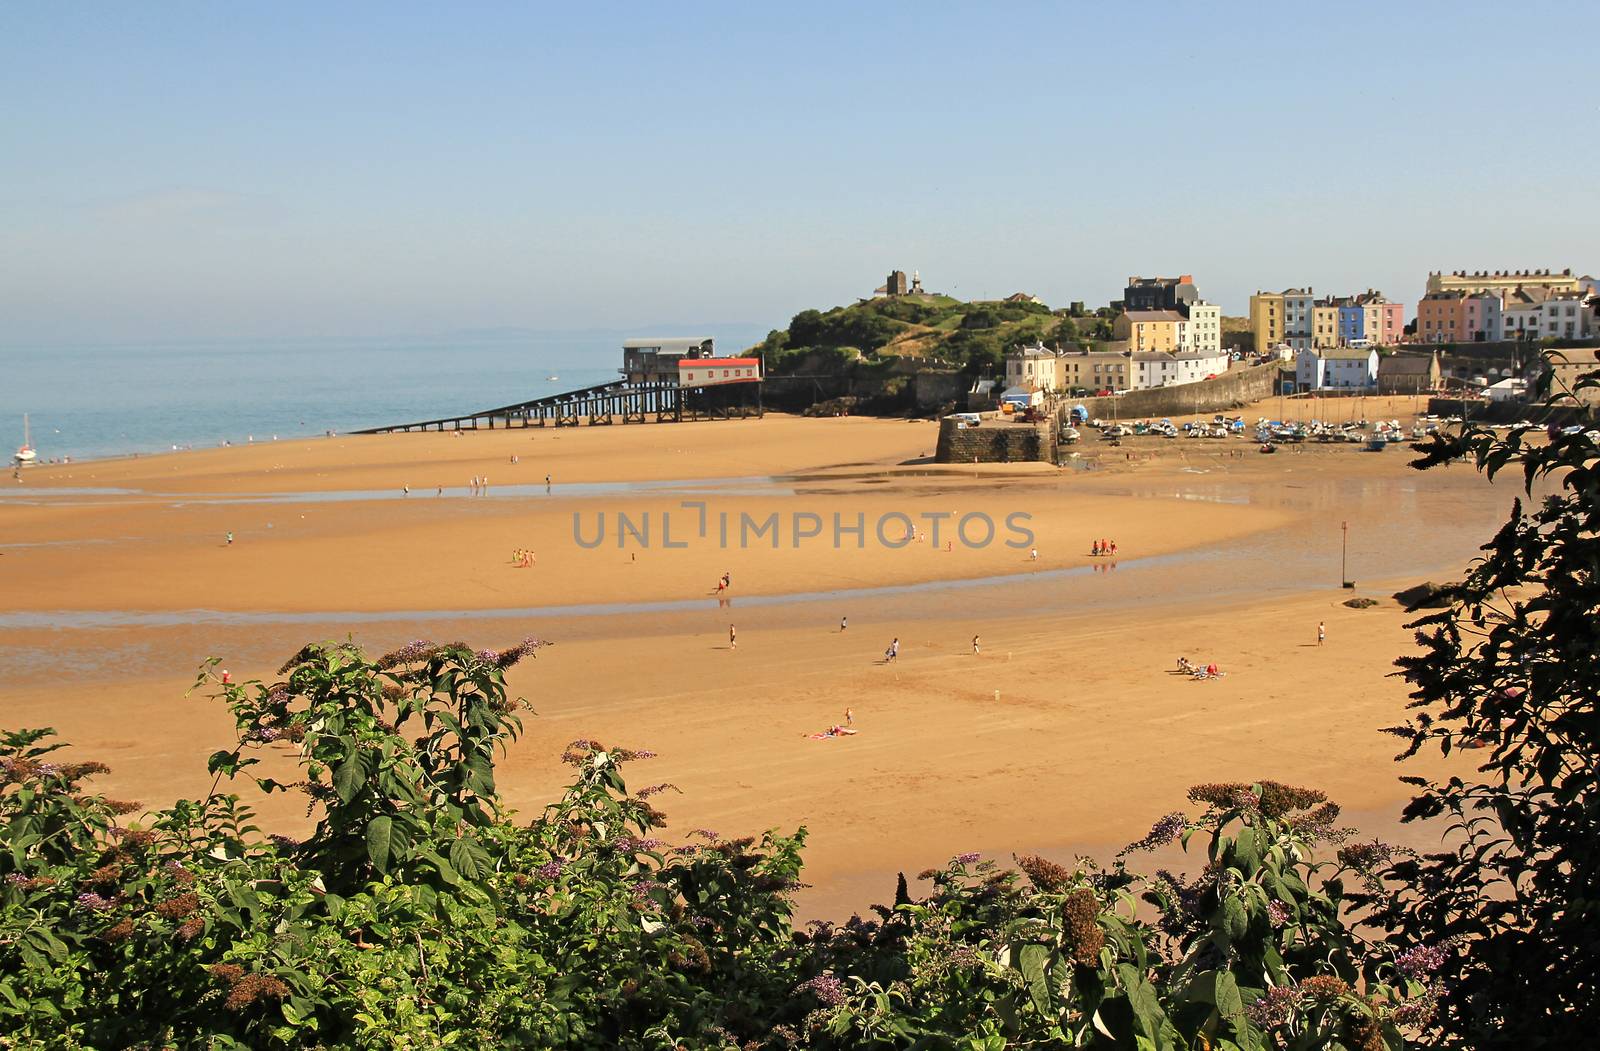 A view of Tenby harbour, in south Wales, with colourful, pastel houses overlooking the beach and sea, framed by foliage